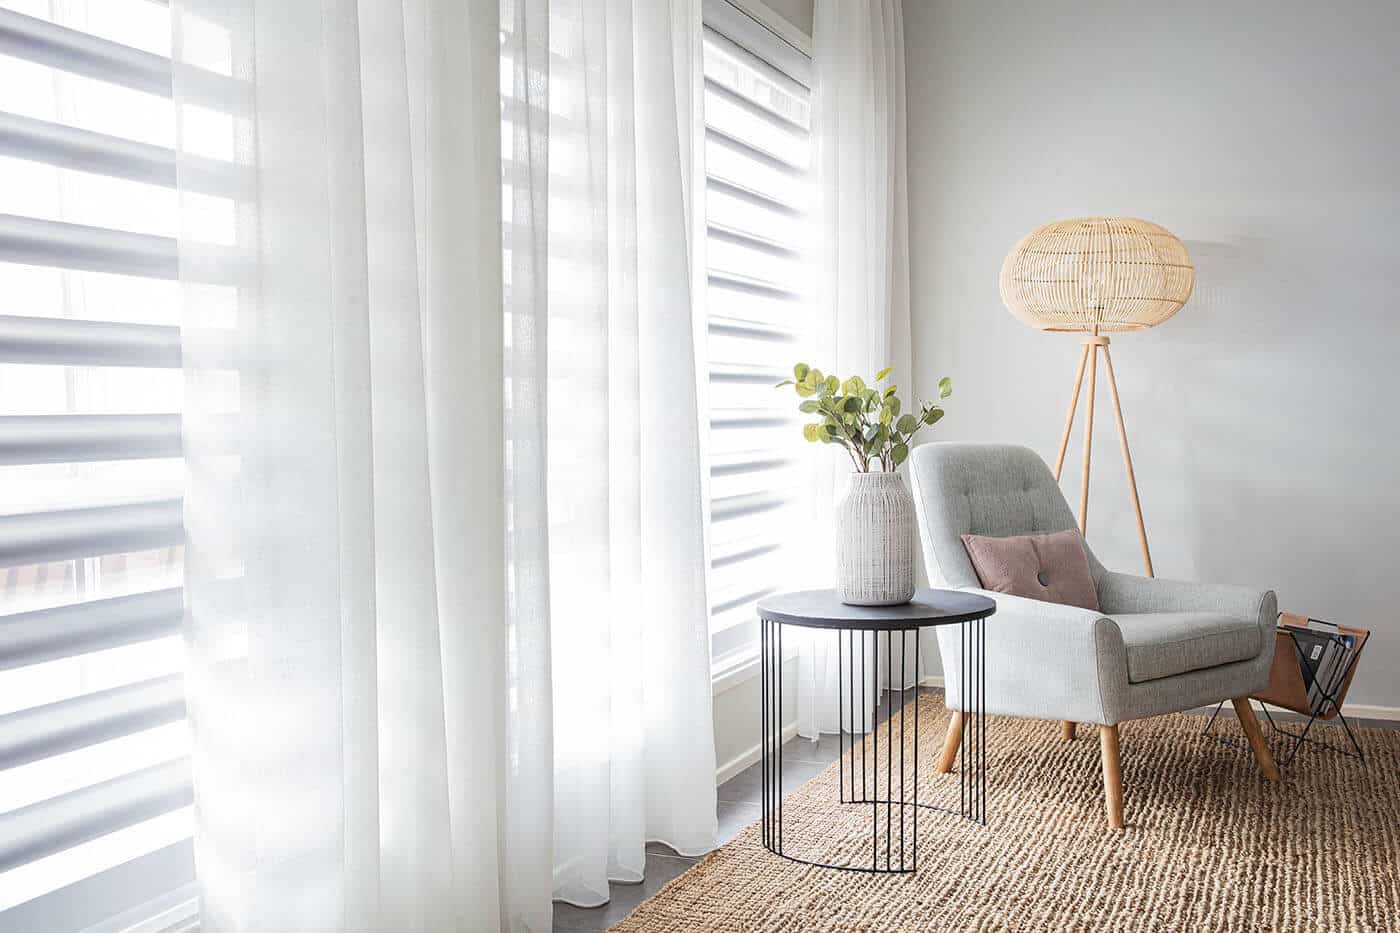 Contemporary living space with comfortable chair and floor rug, featuring Luxaflex sheer curtains partially covering window panes, diffusing natural light and giving the room an atmospheric look.